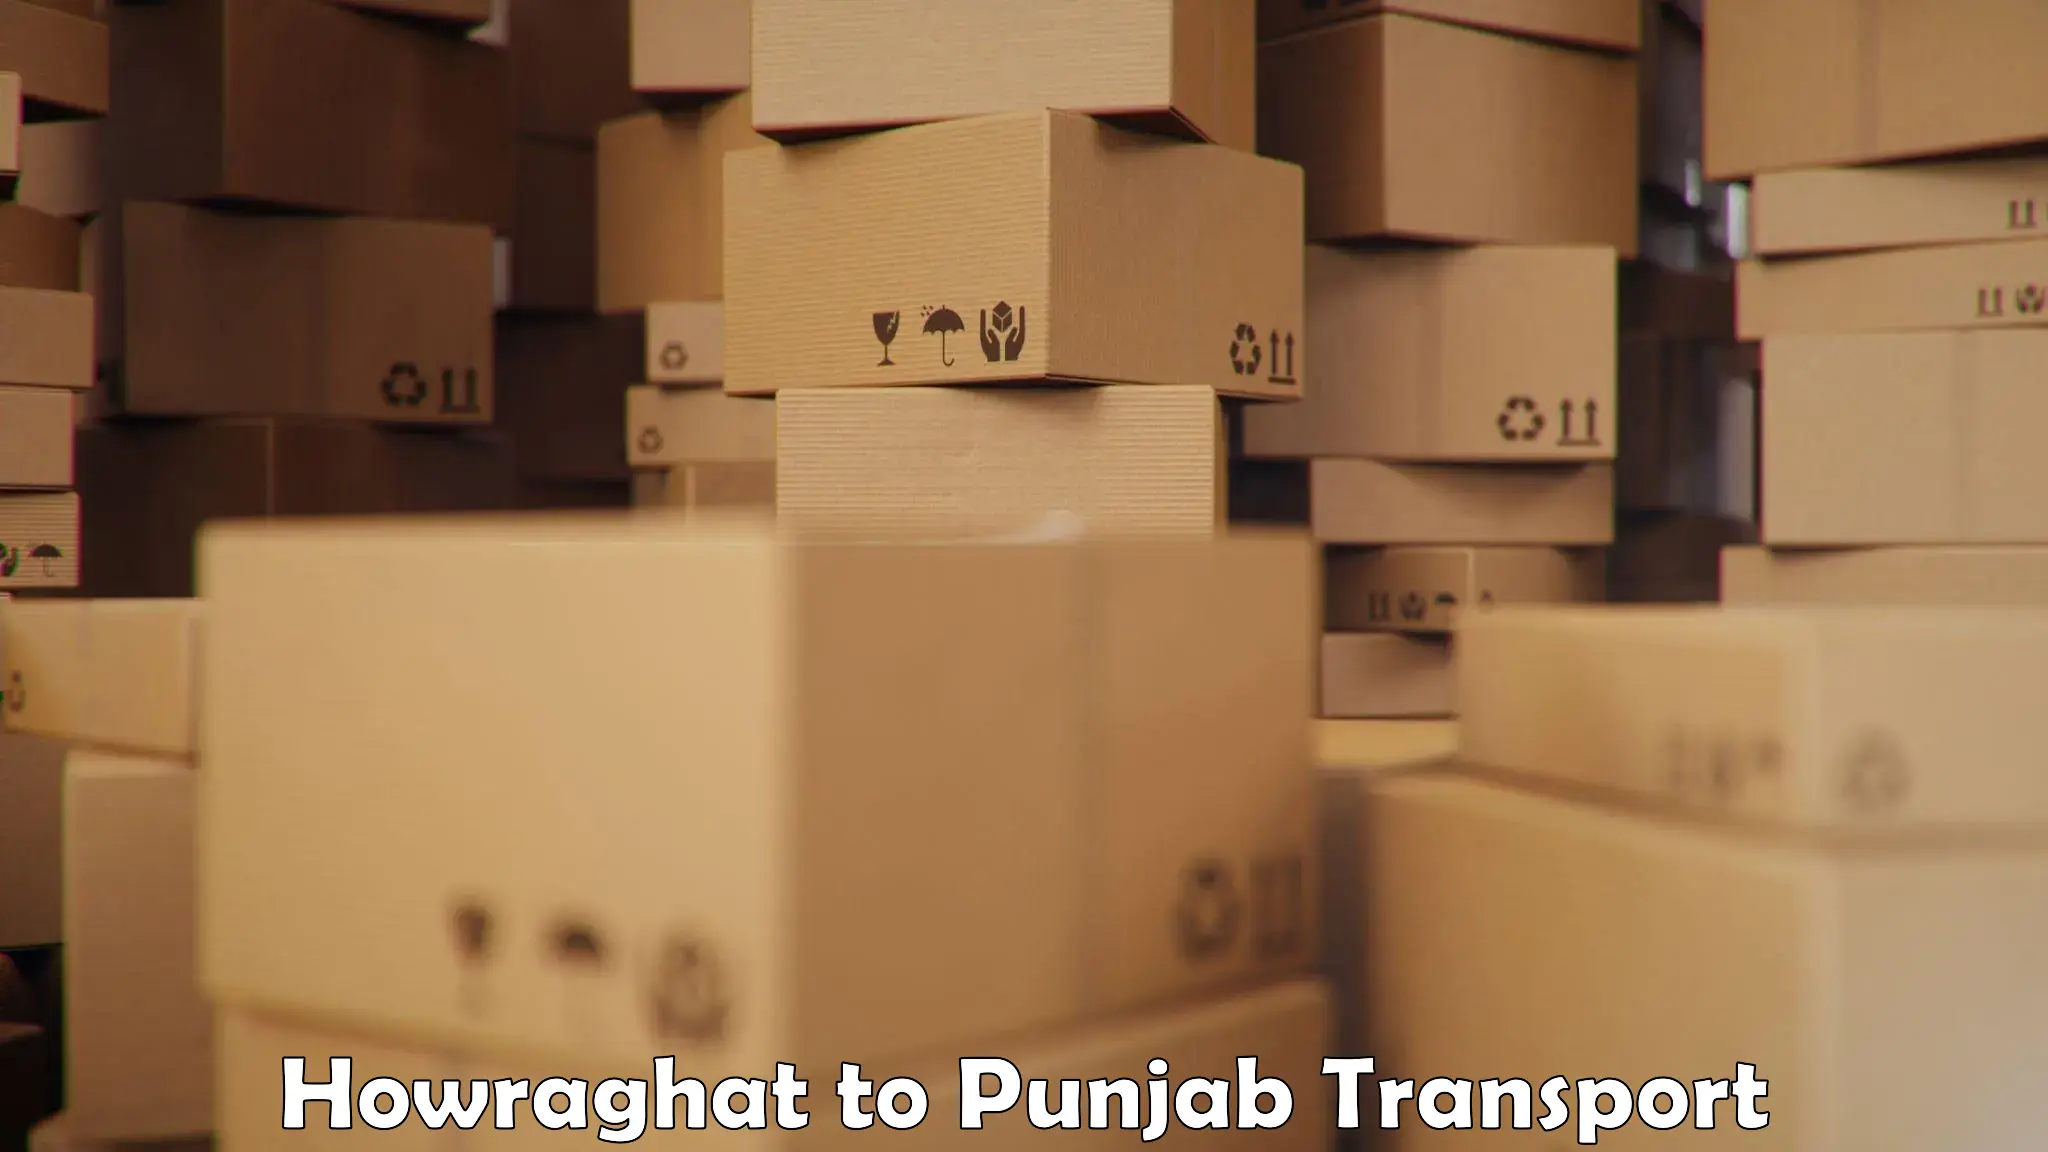 Domestic transport services Howraghat to Punjab